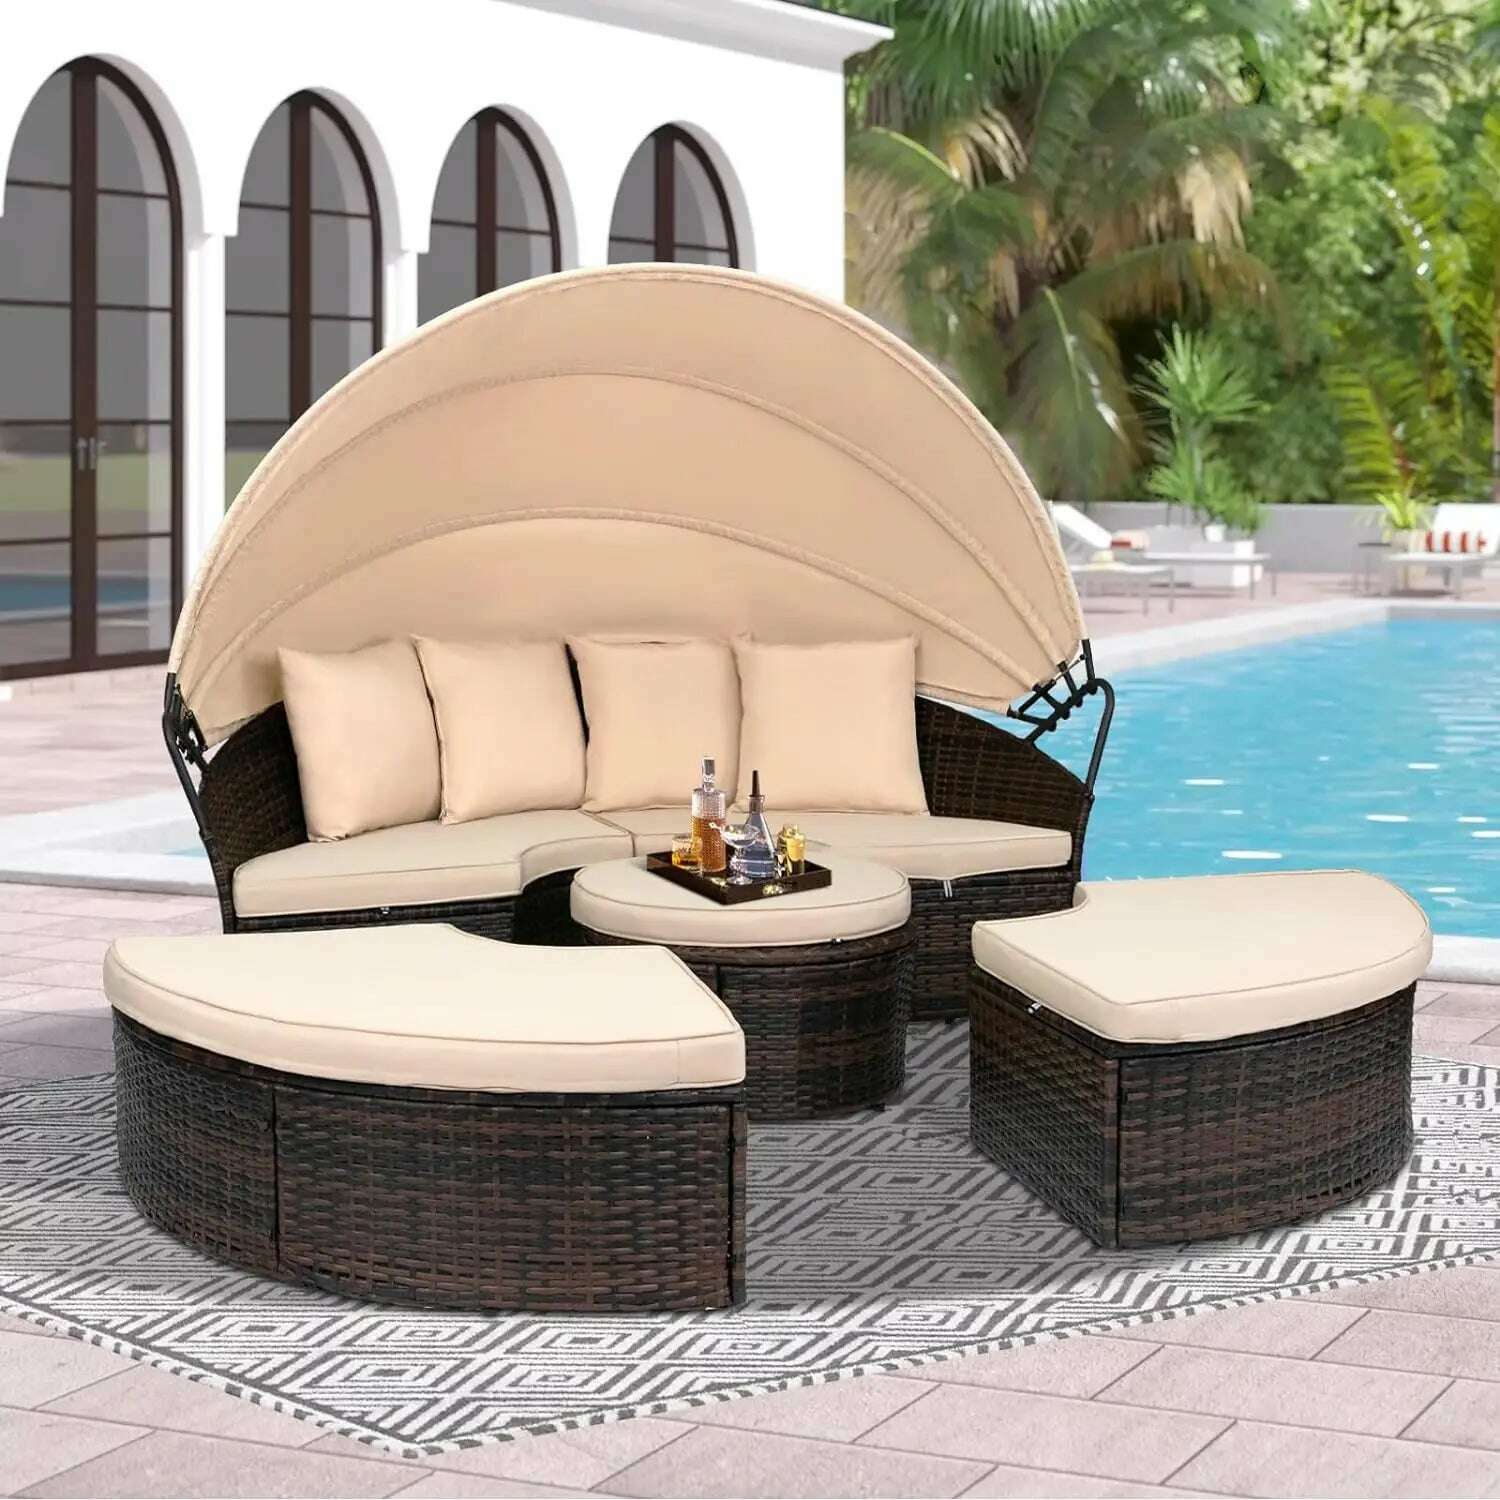 KIMLUD, Outdoor Terrace Canopy Bed with Washable Soft Cushion, Clamshell Shaped Segmented Seats, Suitable for Backyard, Porch, (brown), Brown / United States / Round Daybed, KIMLUD Womens Clothes